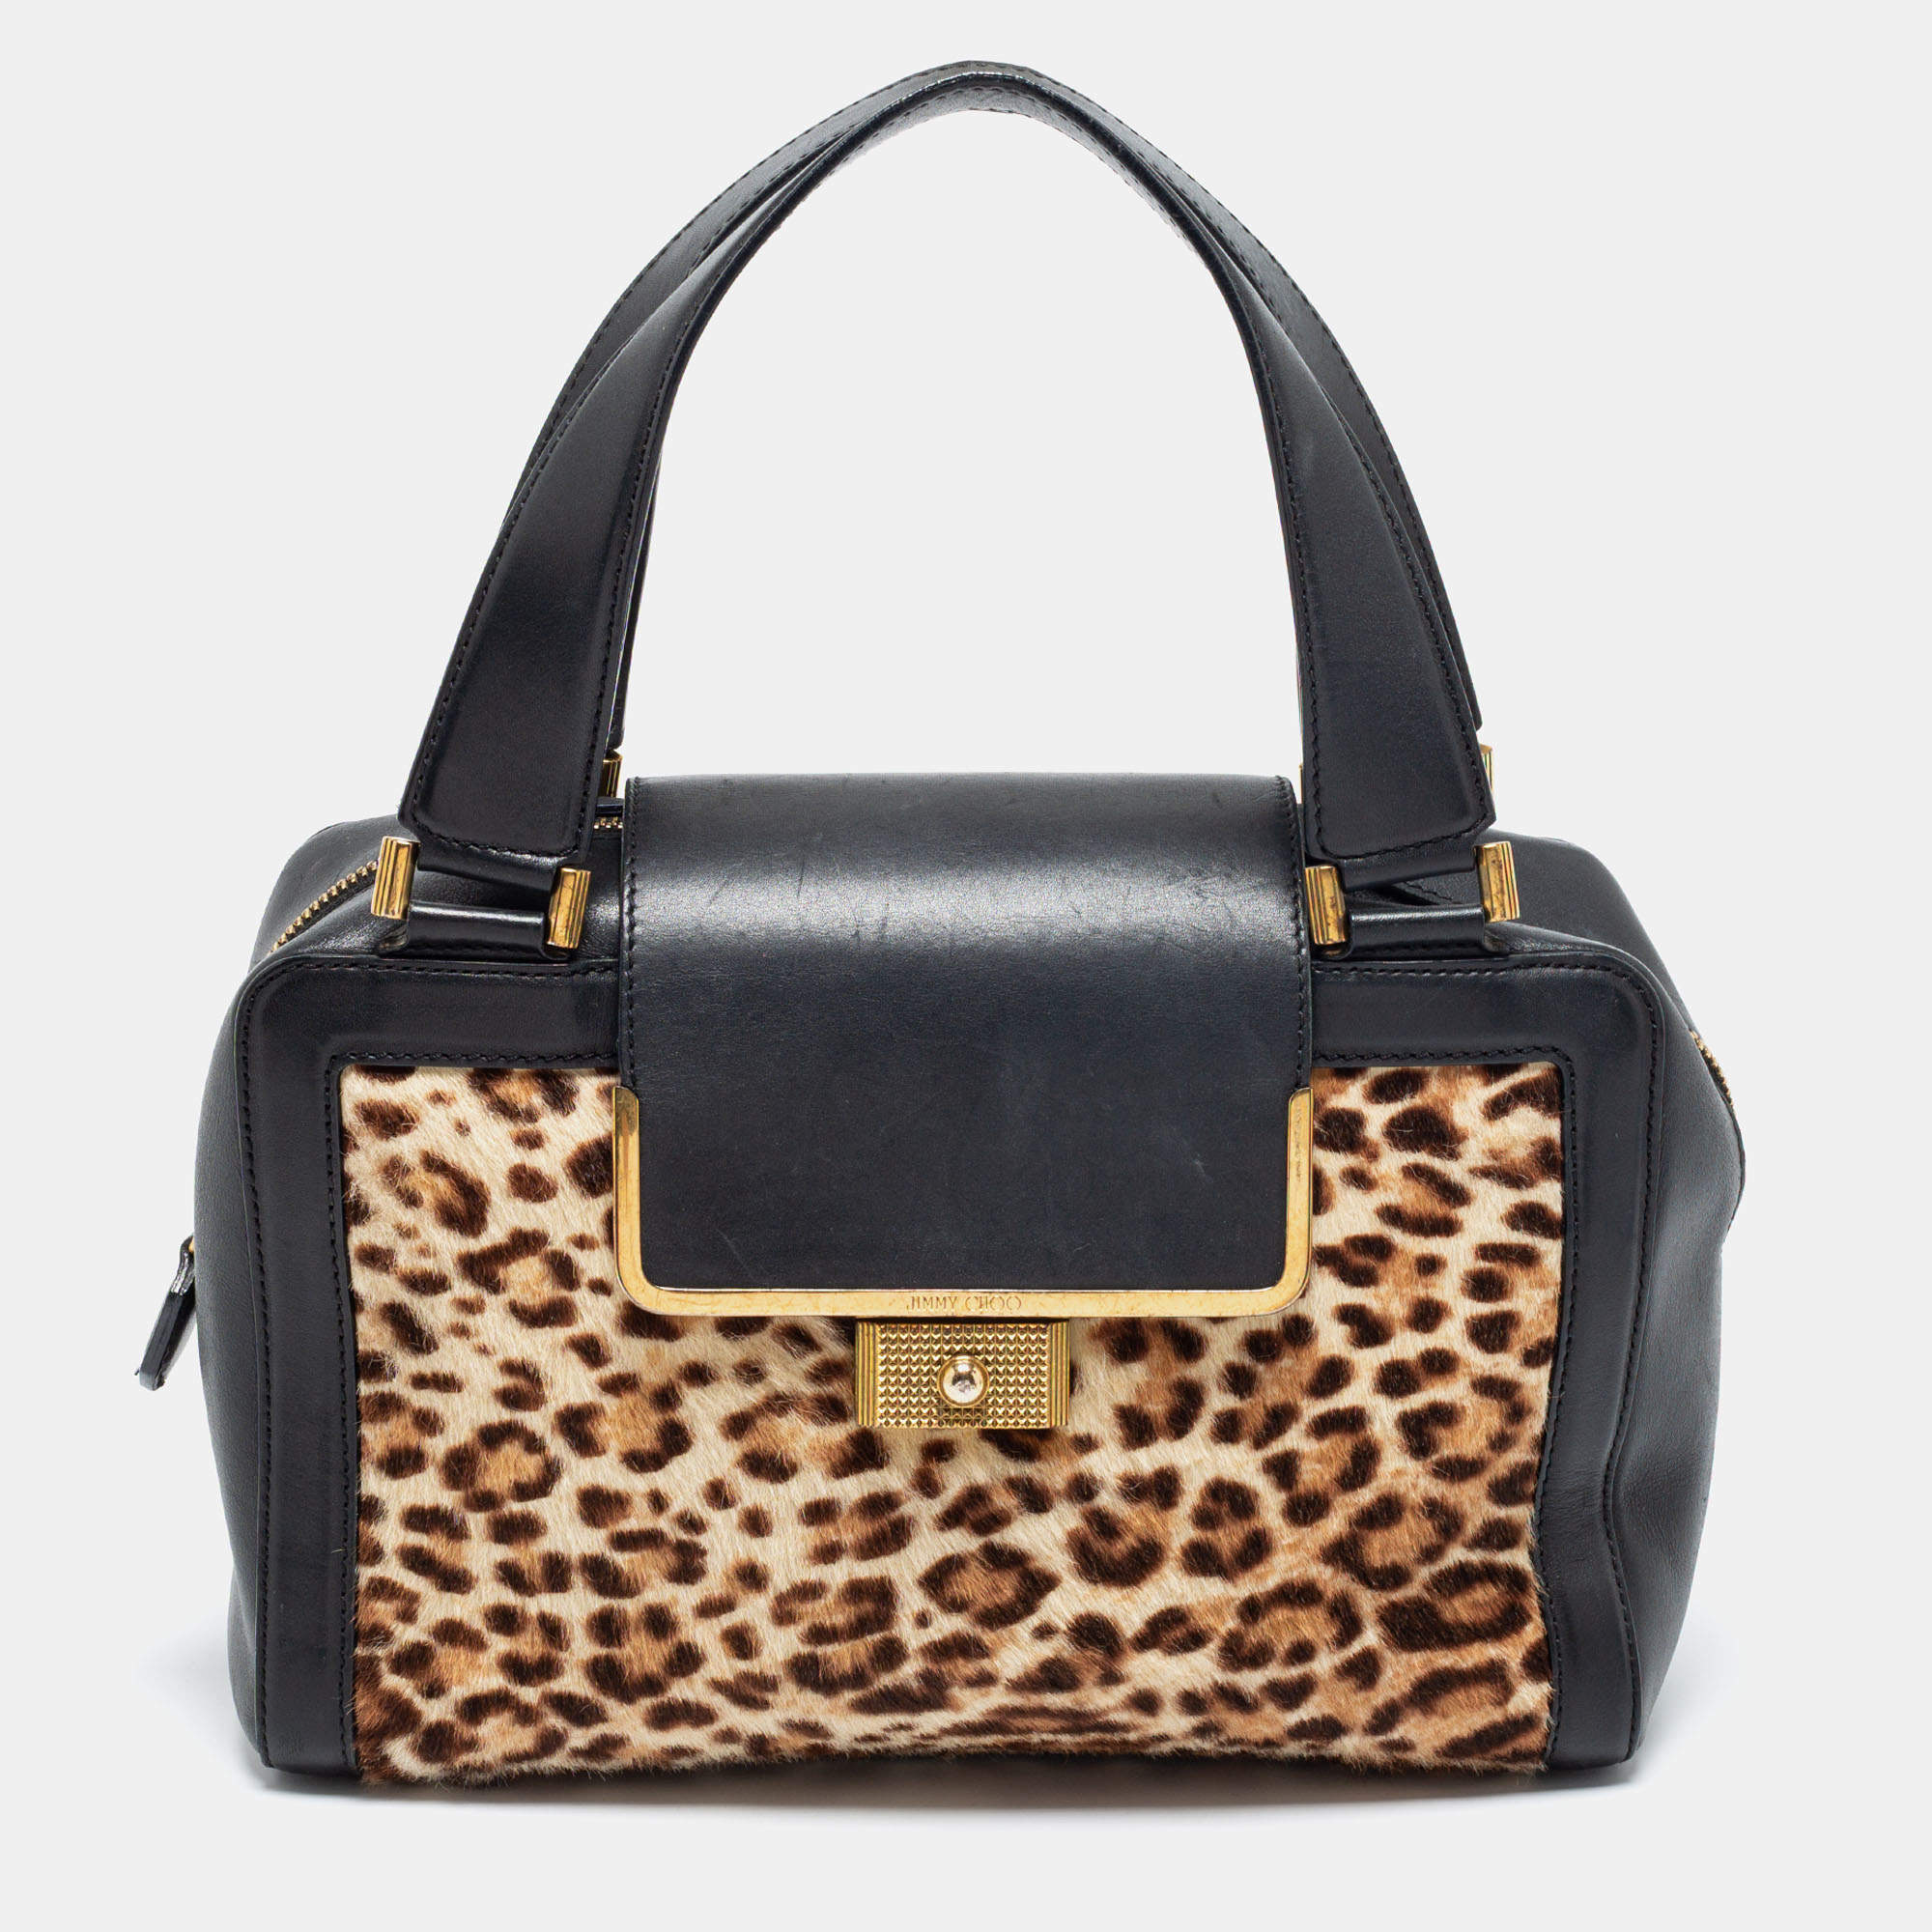 Jimmy Choo Black/Brown Leopard Print Calfhair and Leather Catherine Satchel